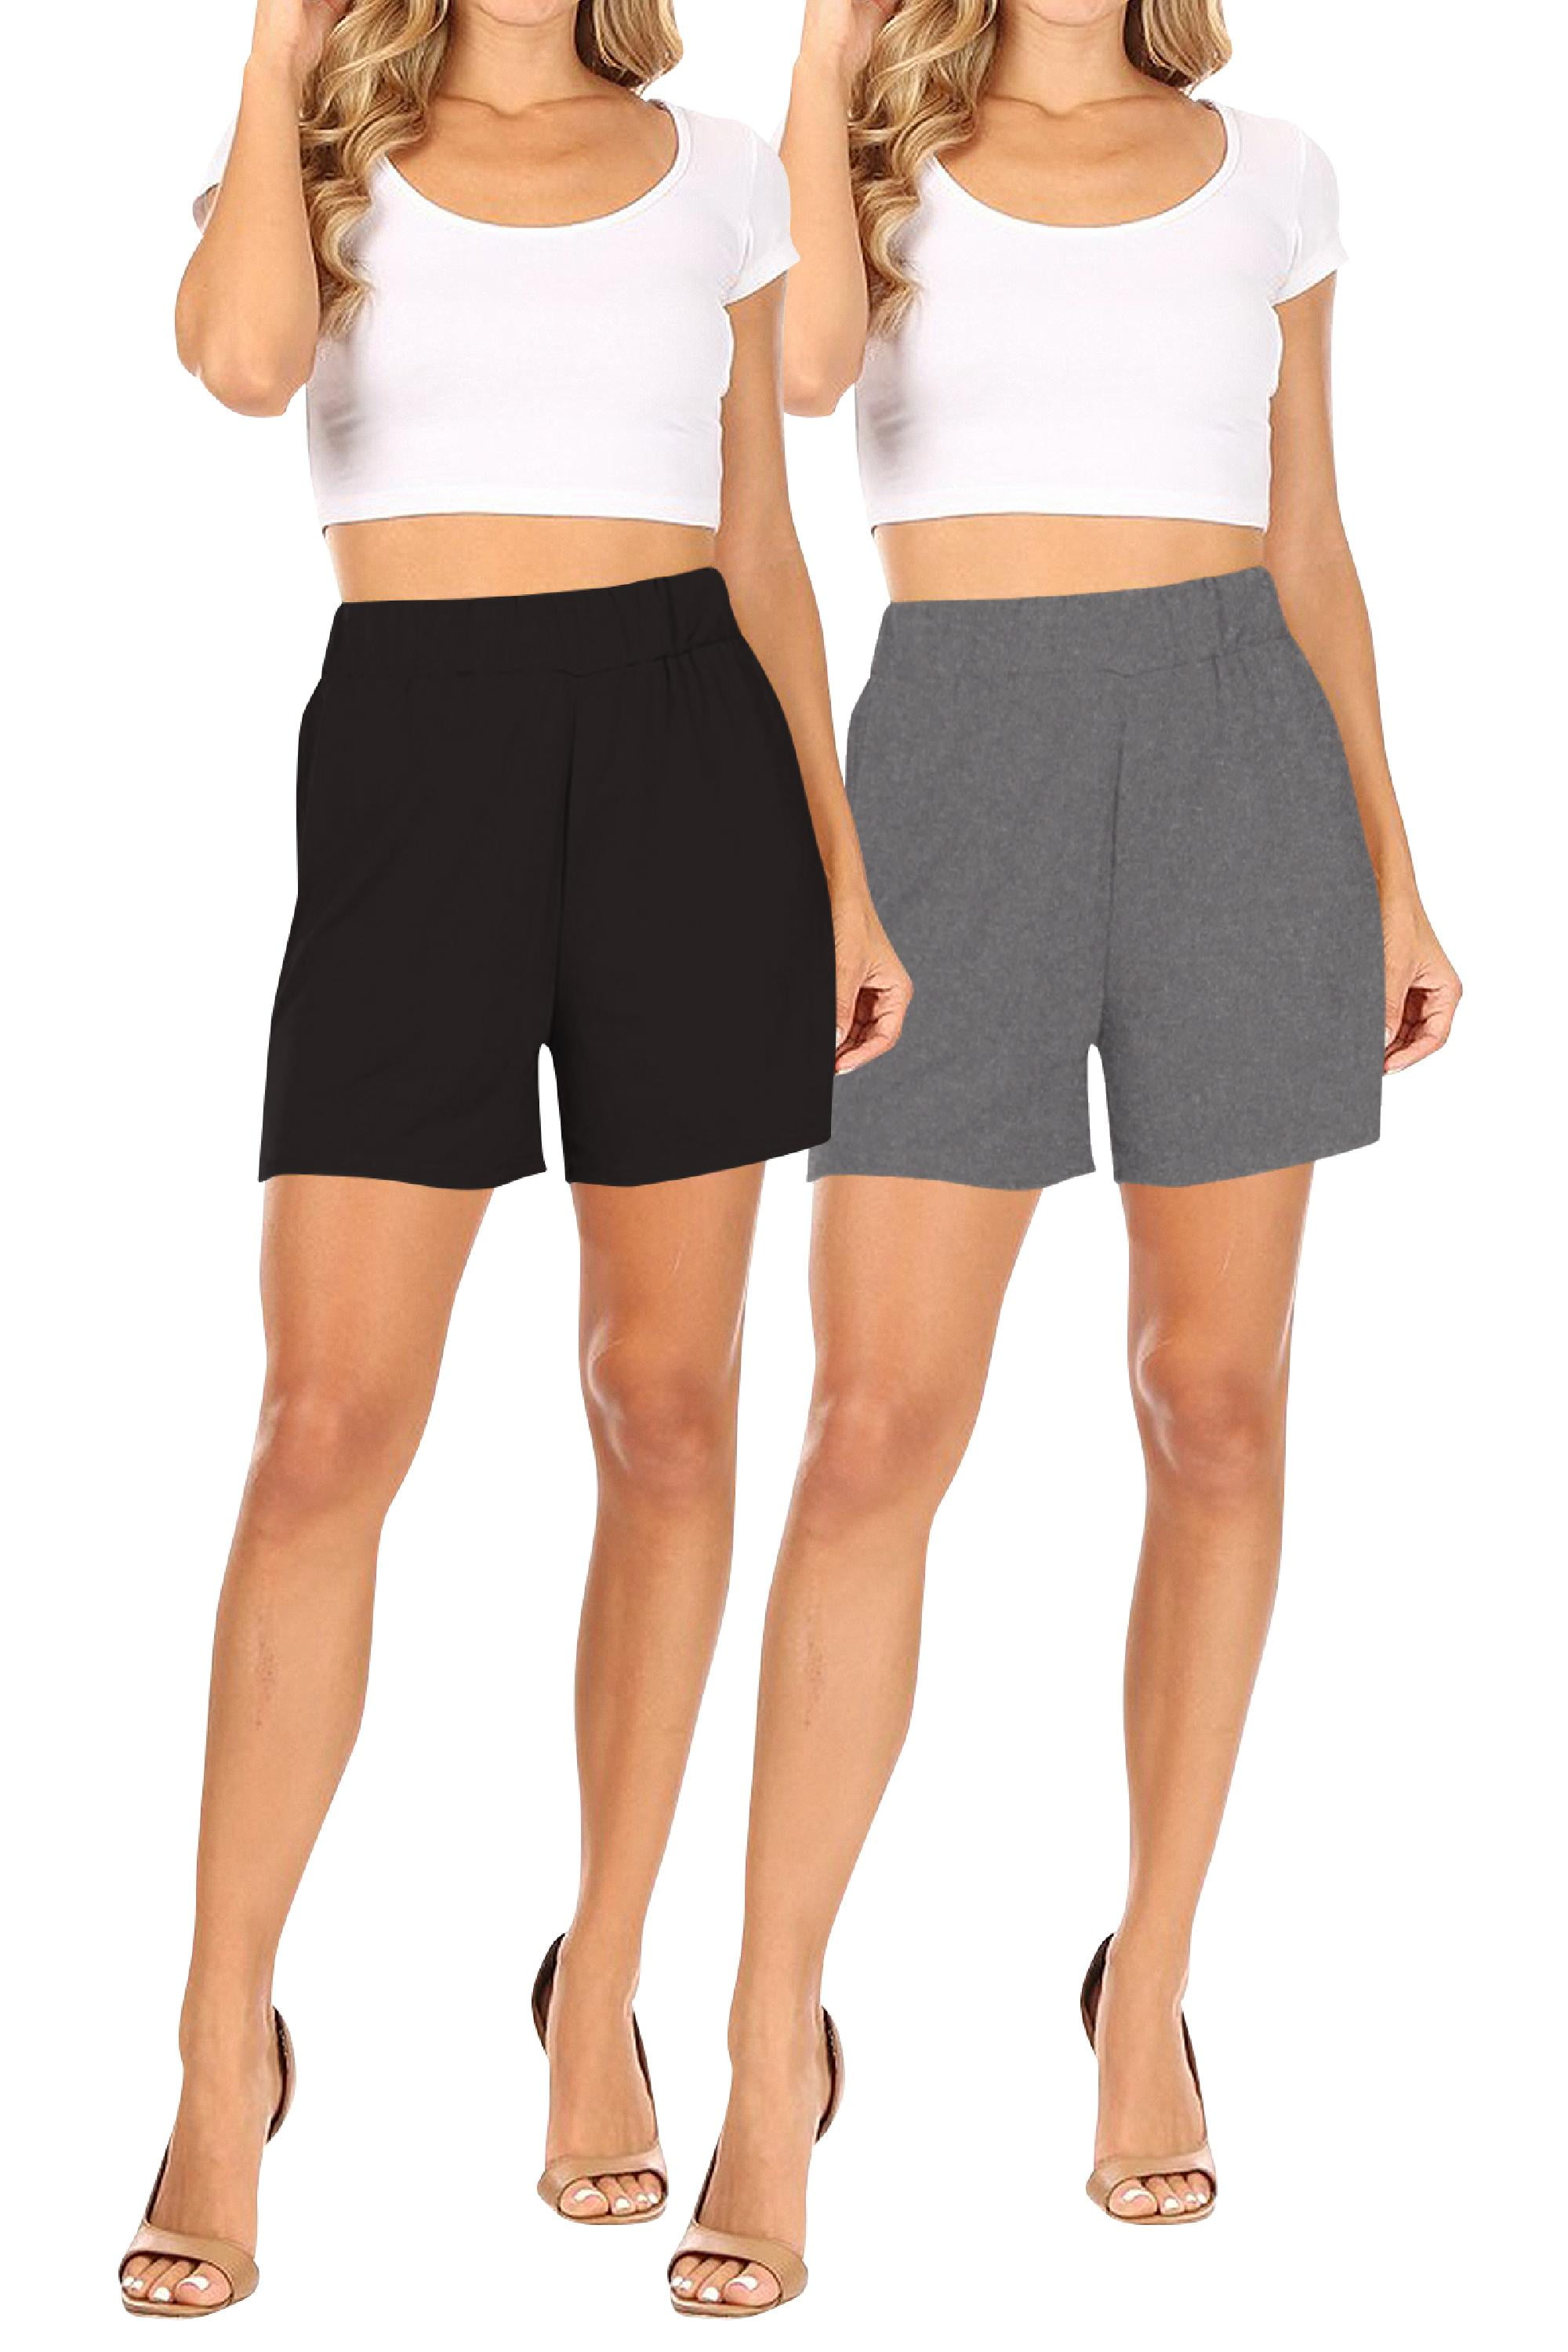 Women's Casual Stretch High Rise Solid Basic Shorts Pants (Pack of 2) Made  in USA